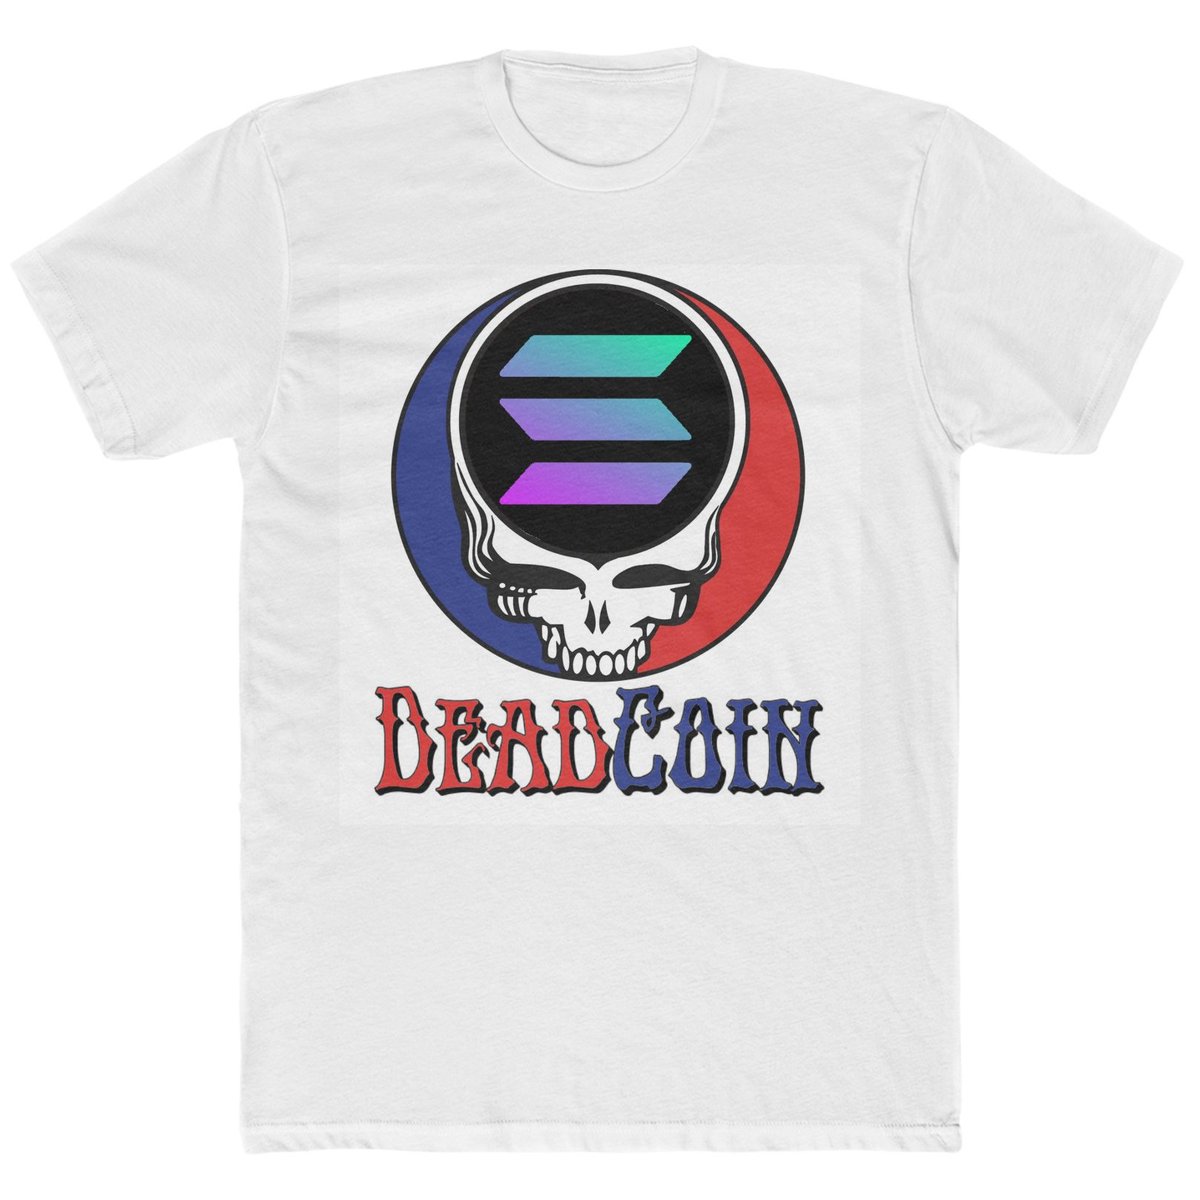 keep an eye out for this t-shirt at Dead & Company in Las Vegas on 5/17/24...gonna be a fun night  
#Solana #SolanaCommunity #GratefulDead #DeadandCompany $Deadco